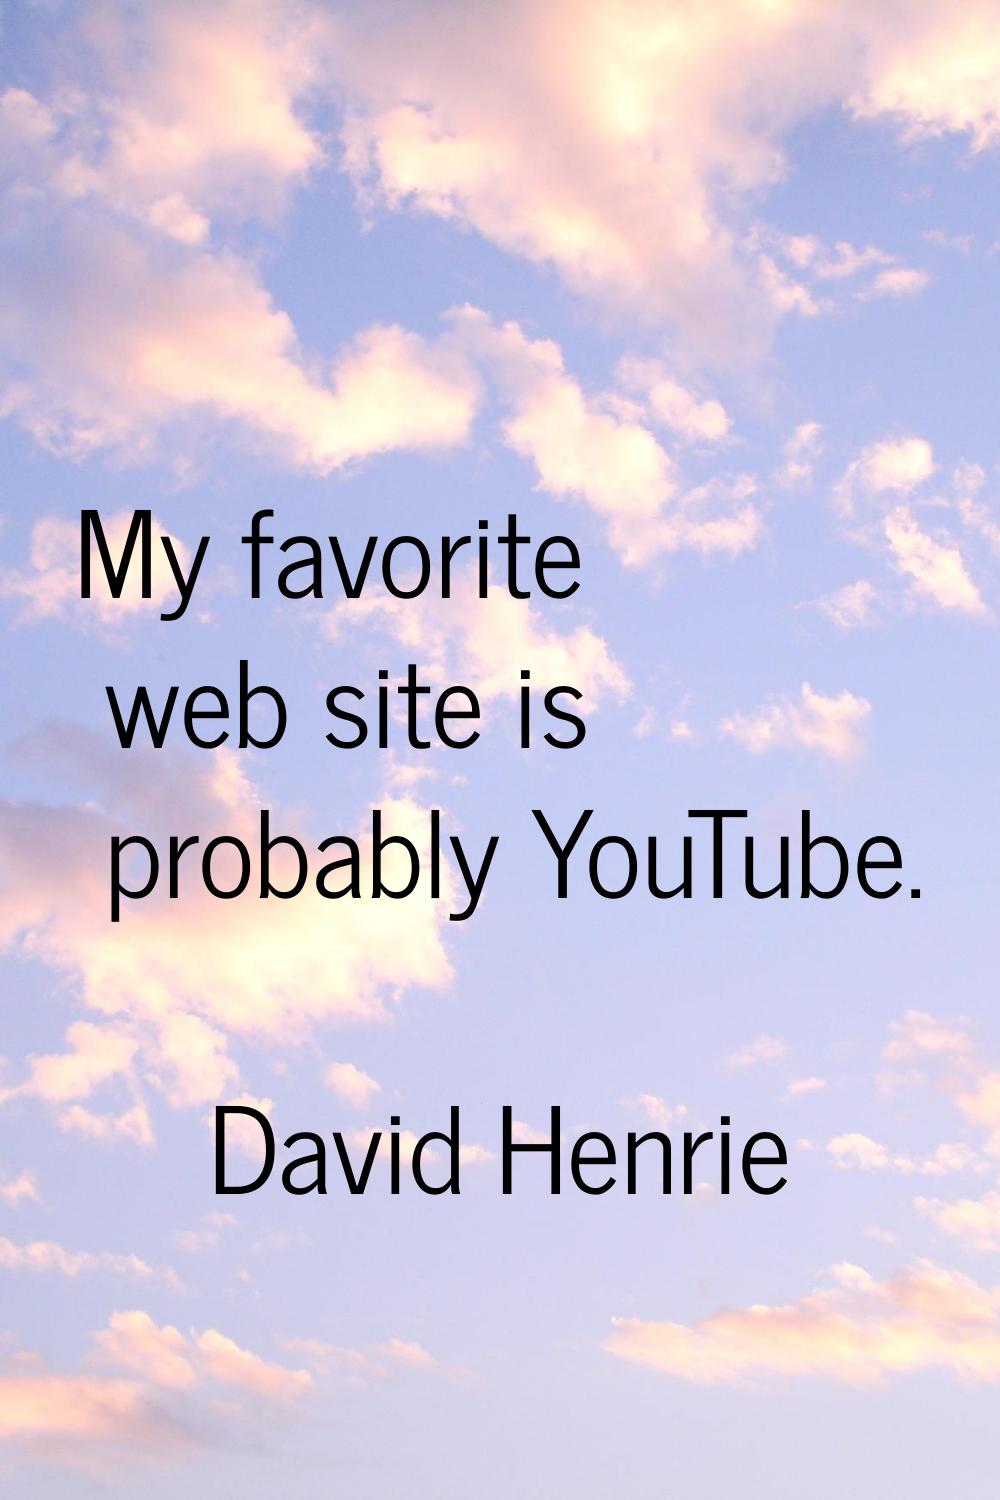 My favorite web site is probably YouTube.